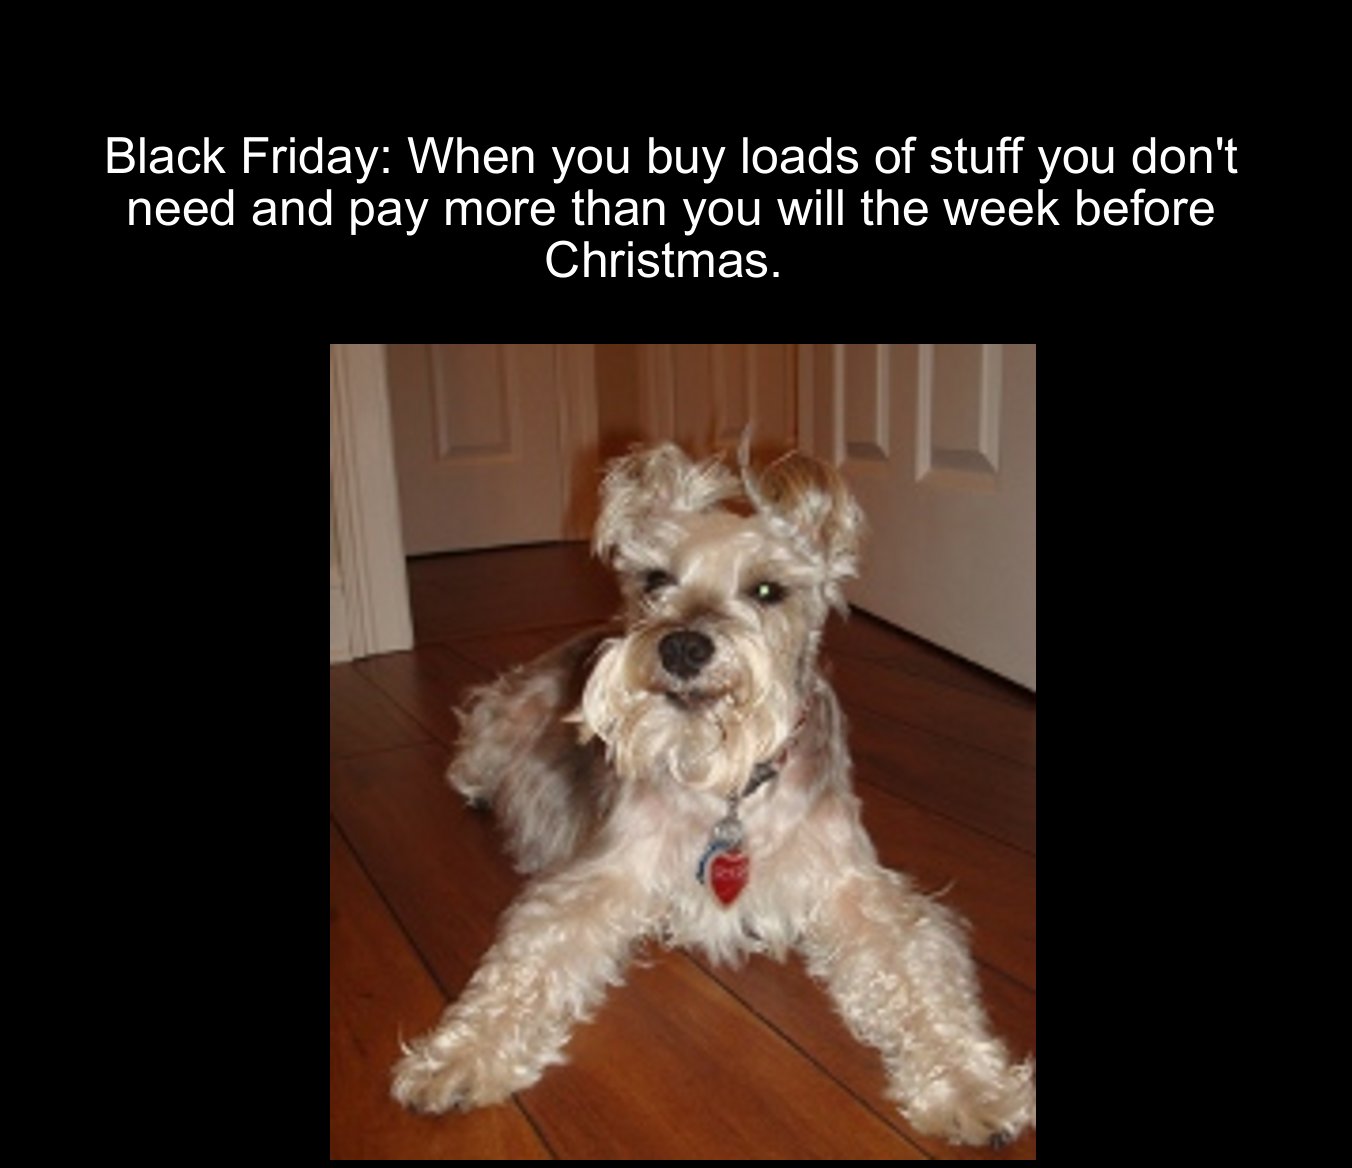 schnoodle - Black Friday When you buy loads of stuff you don't need and pay more than you will the week before Christmas.